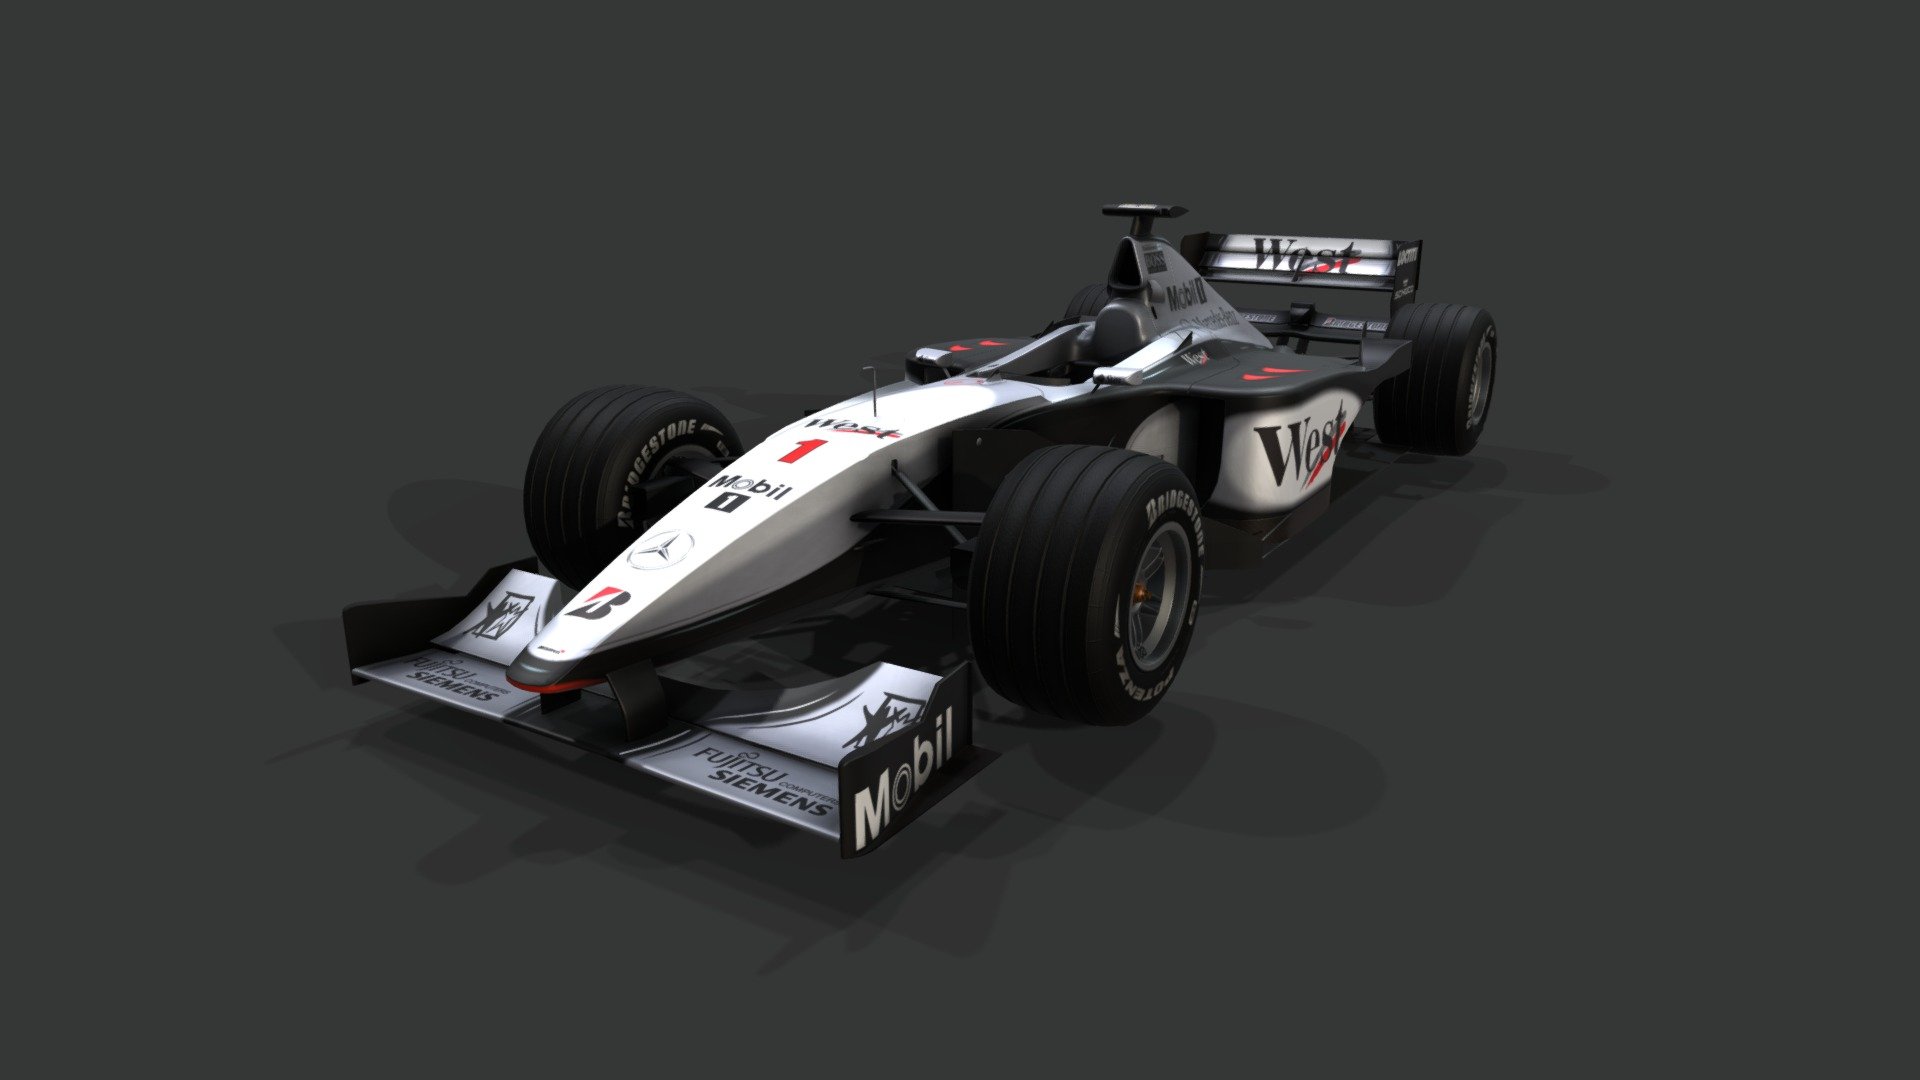 1999 McLaren MP4/14 f1 car. Shape and textures for the car and tires made from scratch for Grand Prix 4.
It comes with early season livery 3d model